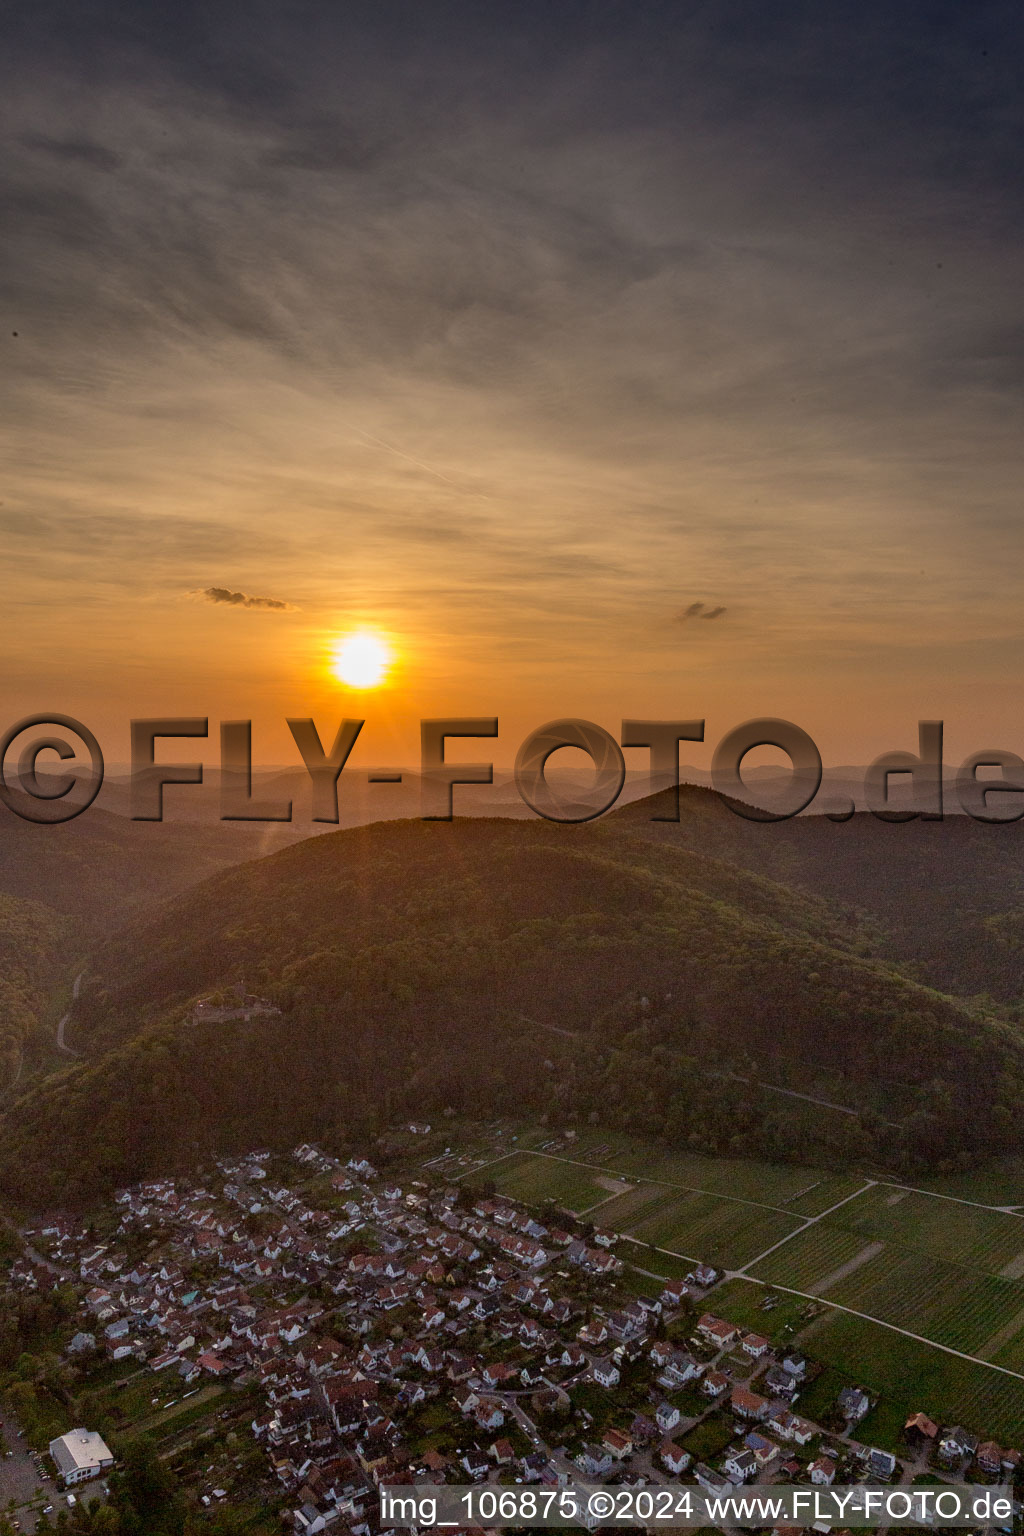 Sunset over the countryside of Pfaelzerwalds in Klingenmuenster in the state Rhineland-Palatinate, Germany